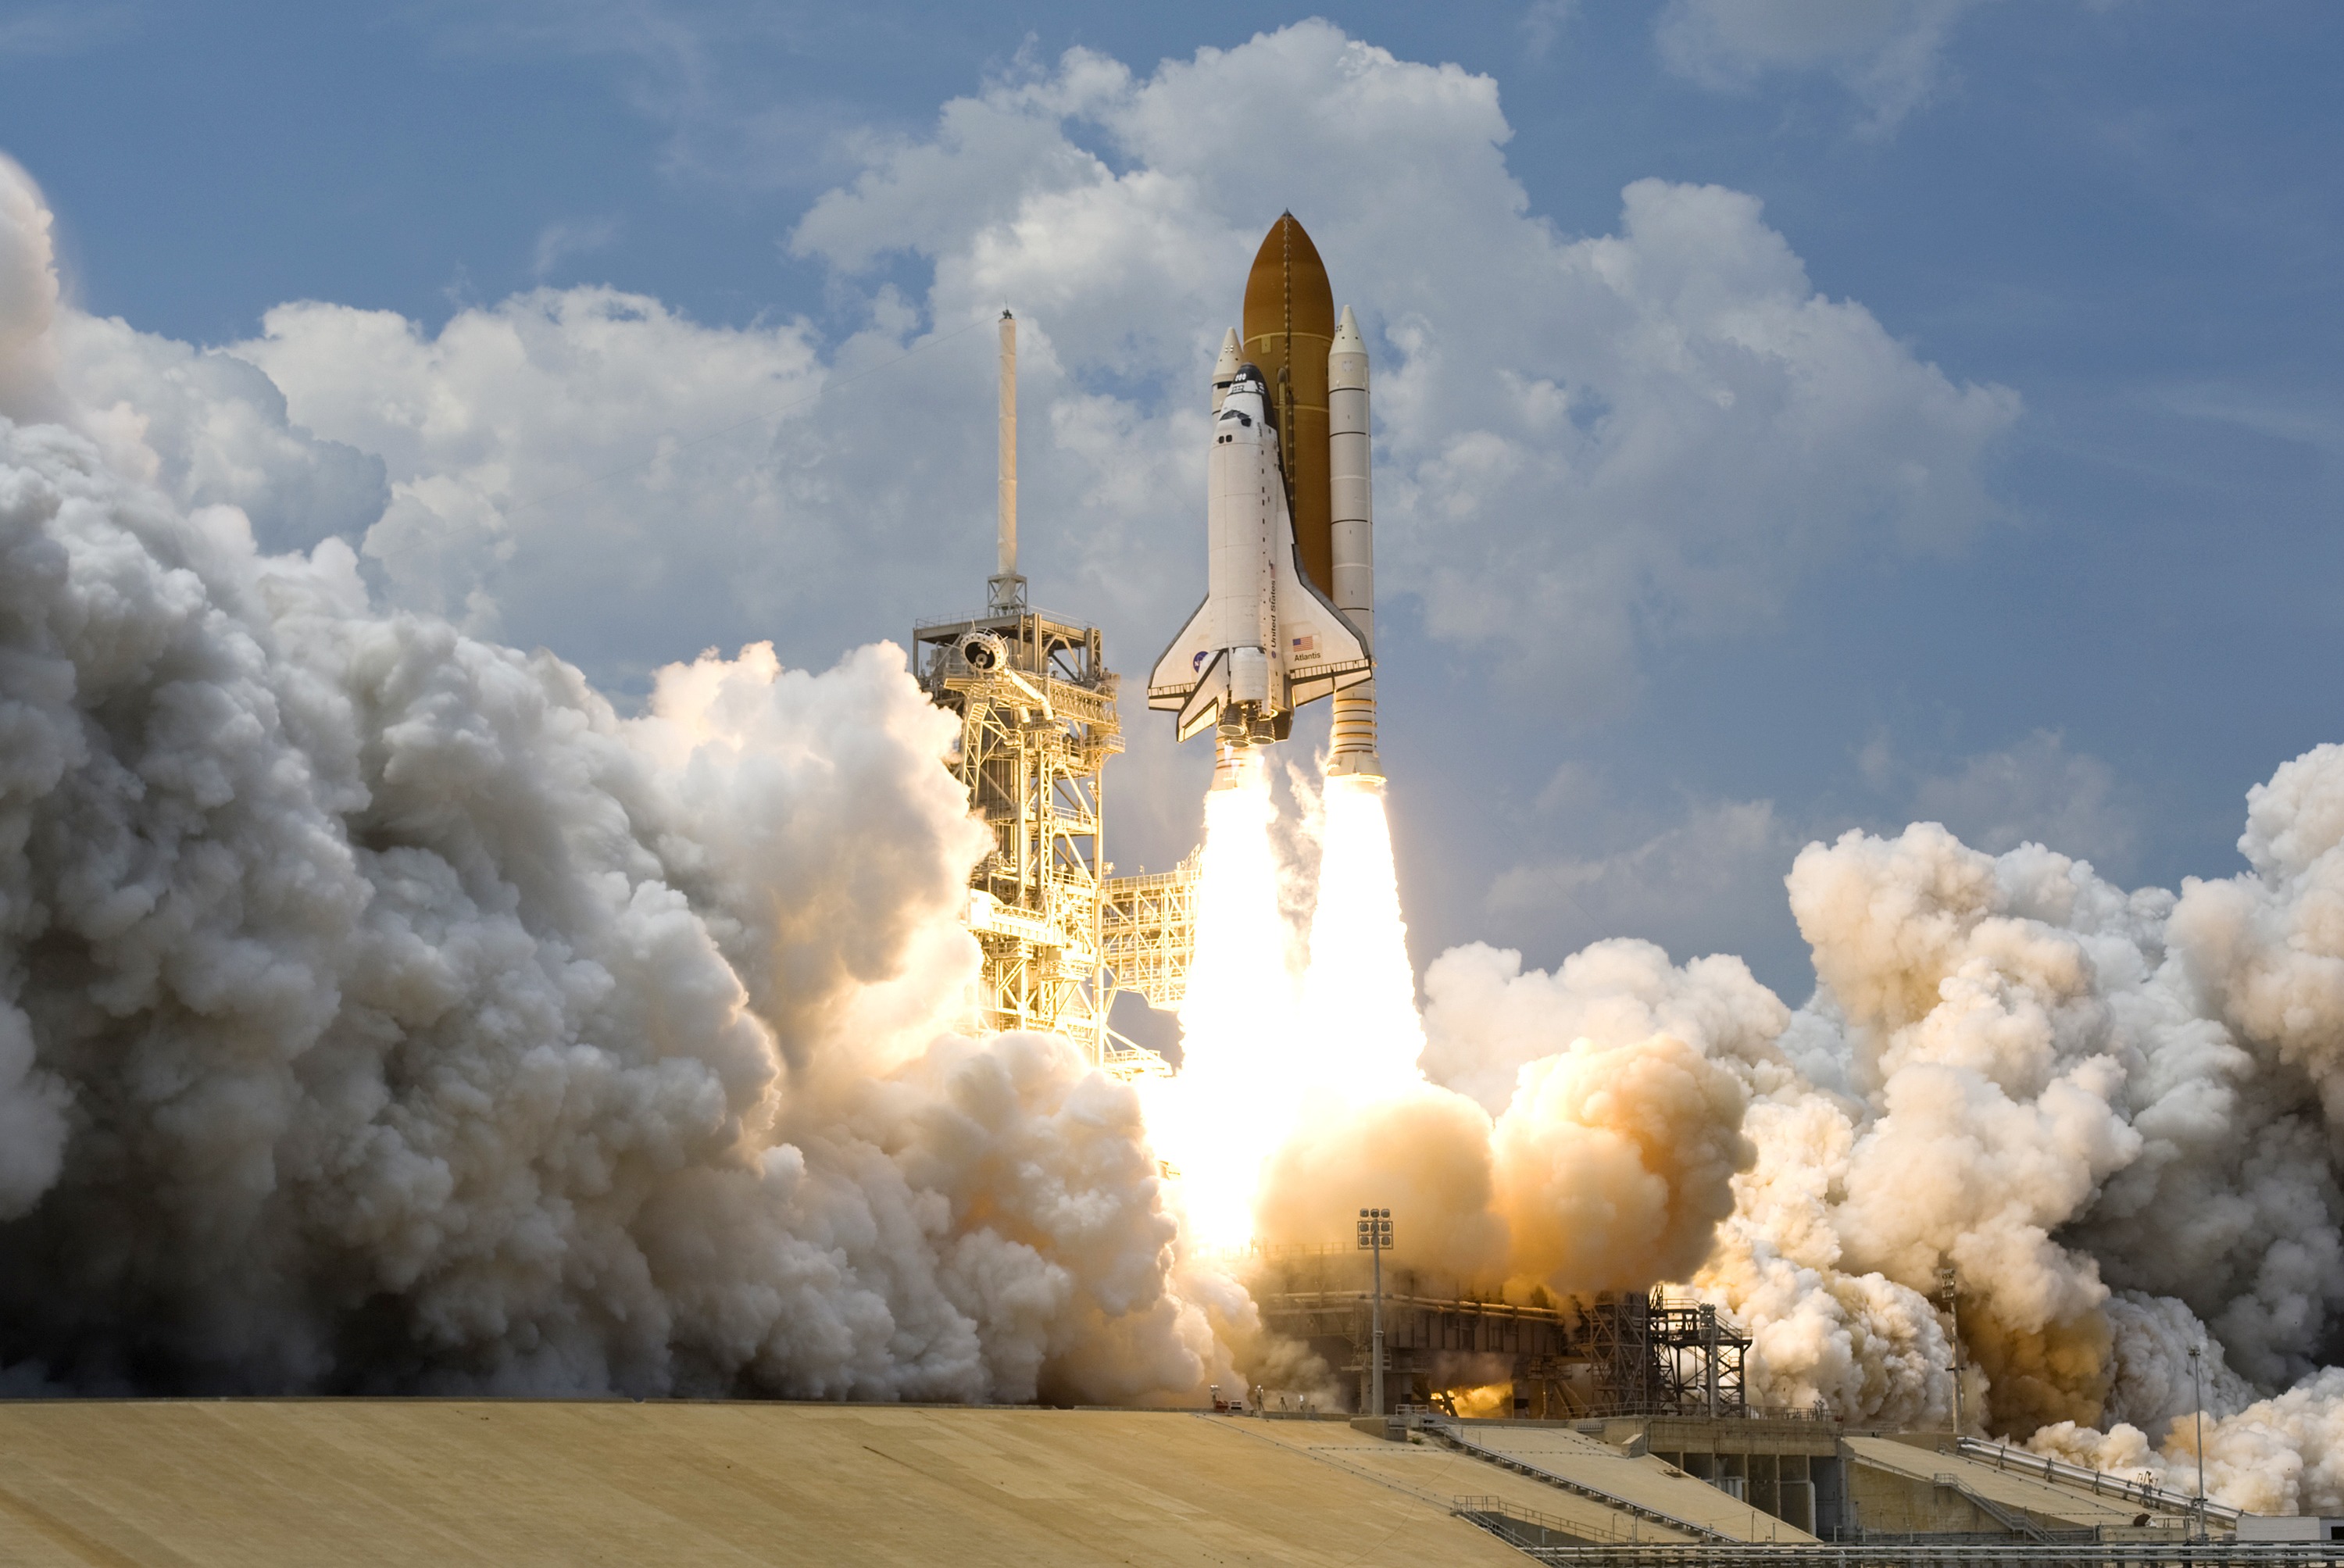 Ready, Set, Launch! Project Managing the Launch of your New Website